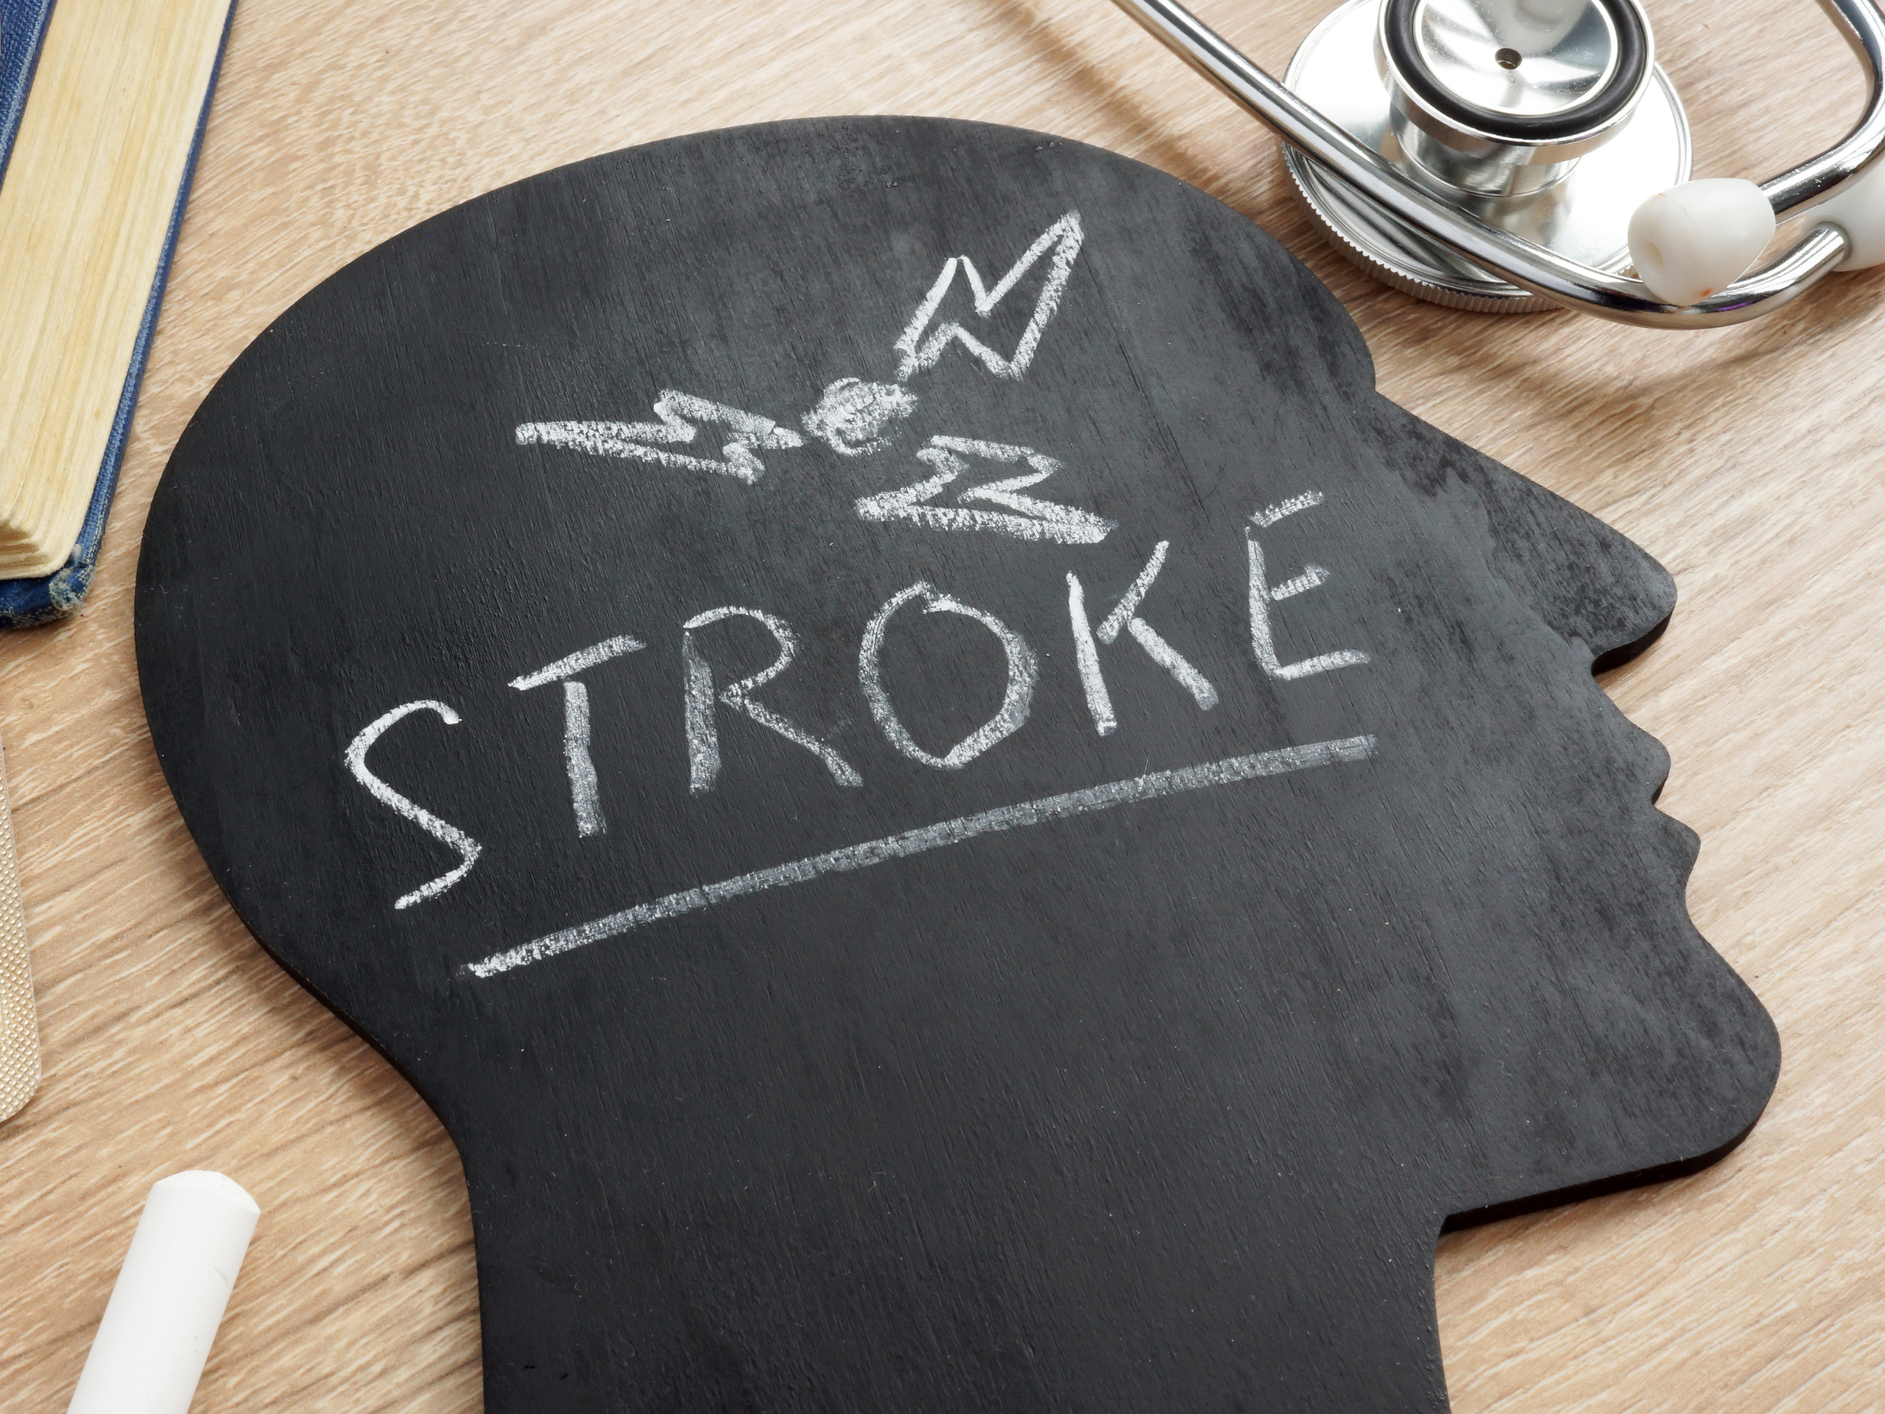 The surprising thing that could slow getting help after a stroke